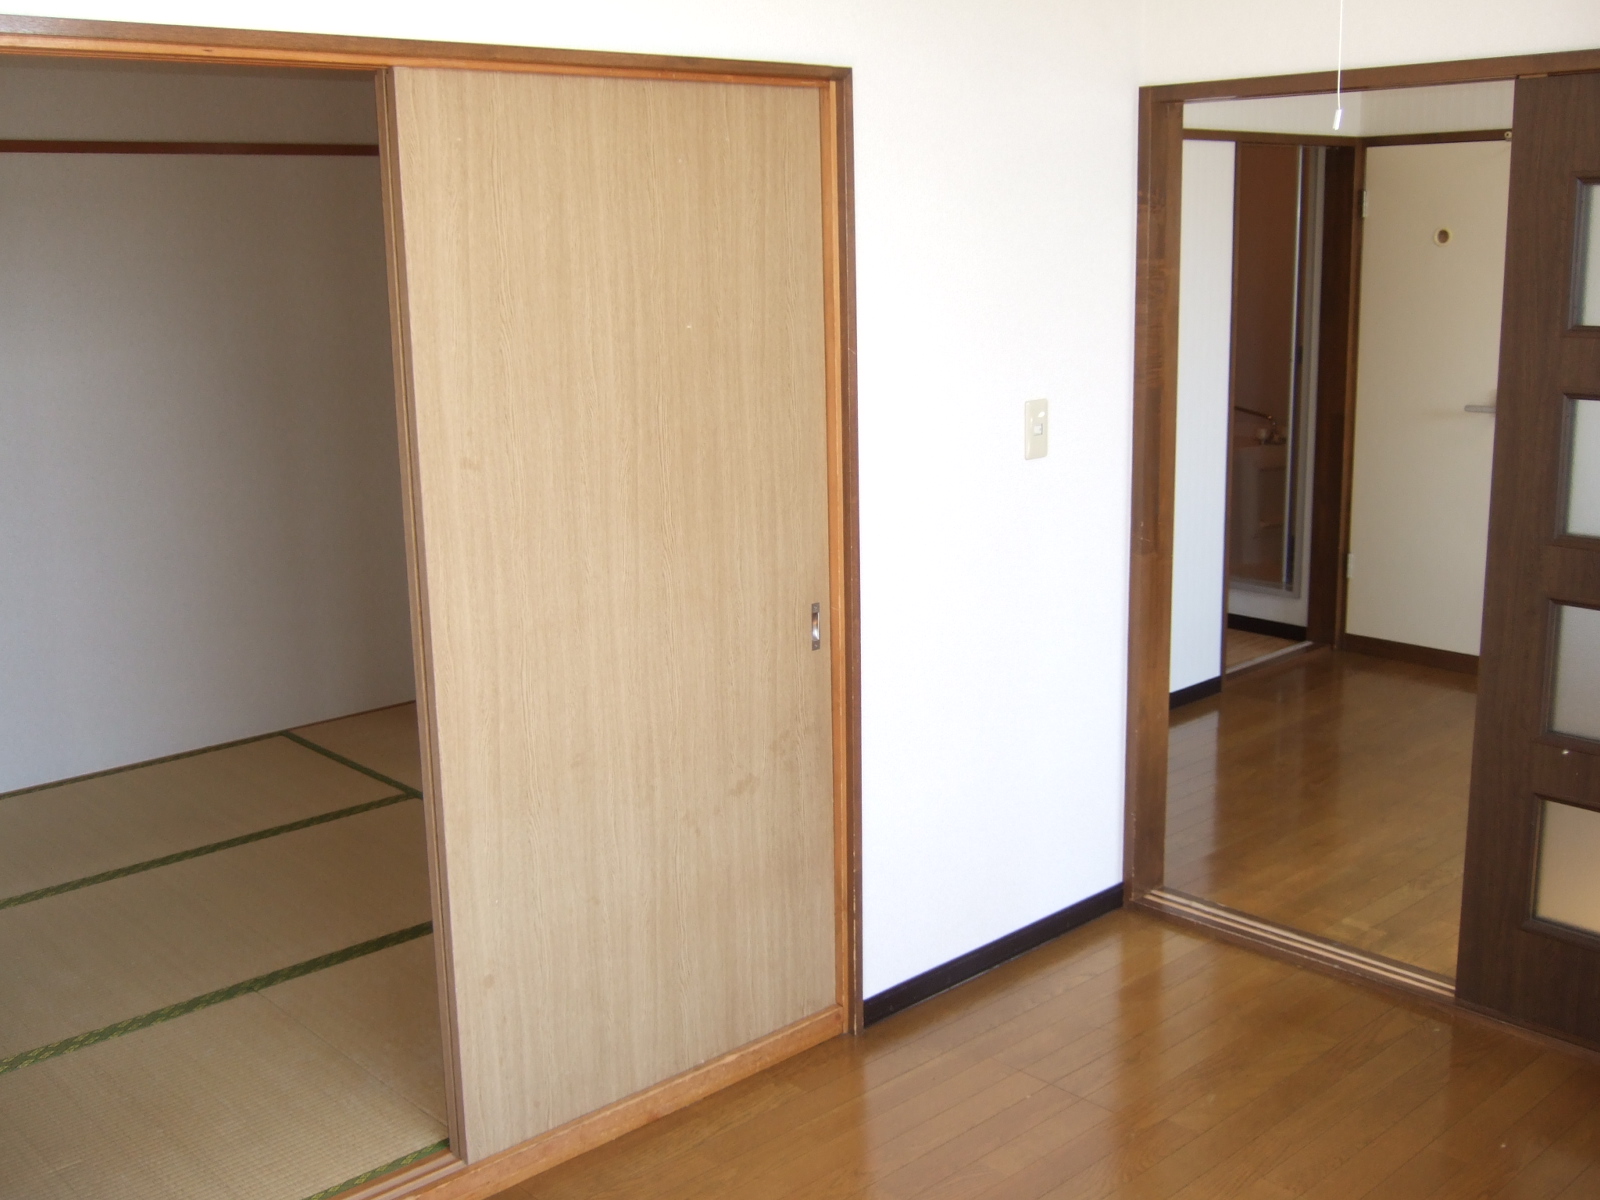 Other room space. Has led Western and Japanese-style room